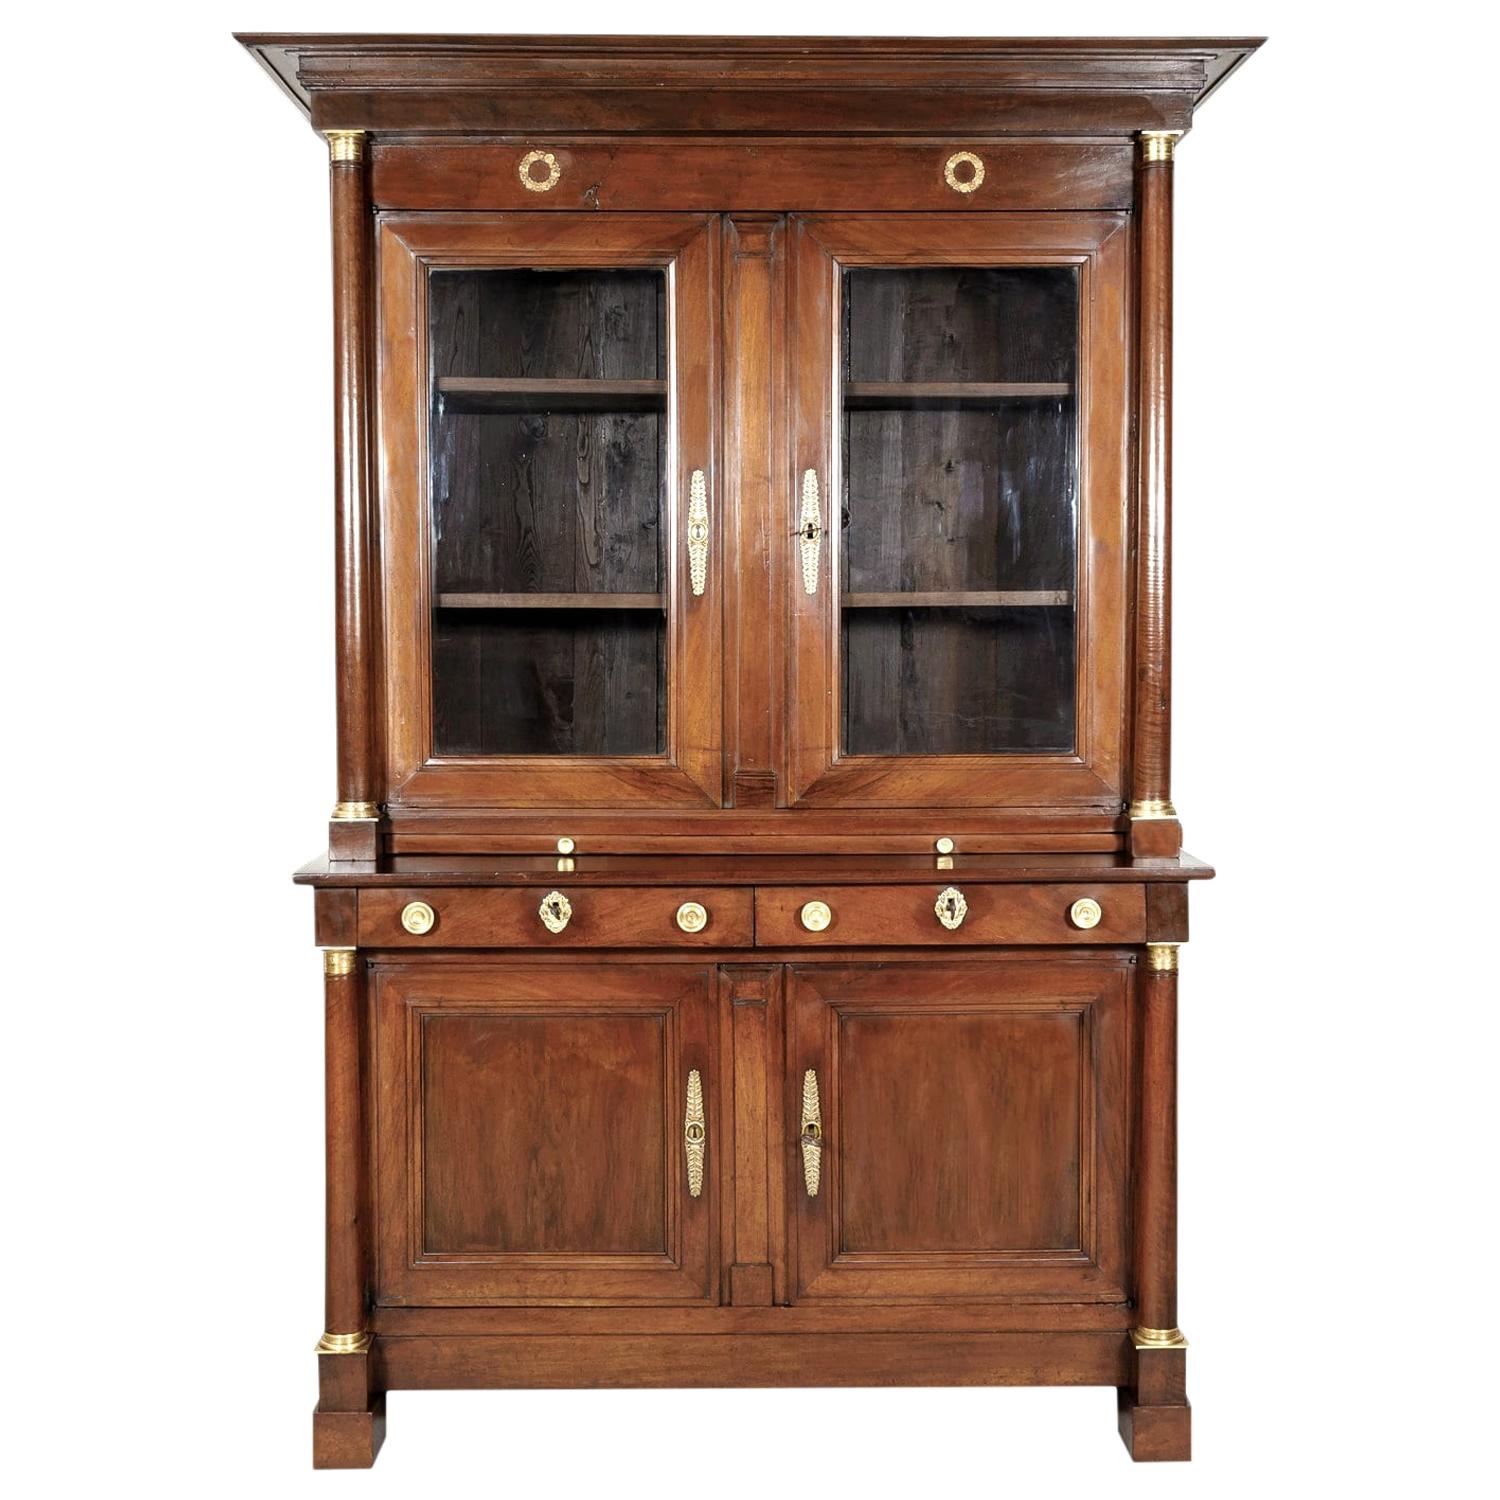 19th Century French Empire Period Walnut Bibliotheque or Bookcase For Sale